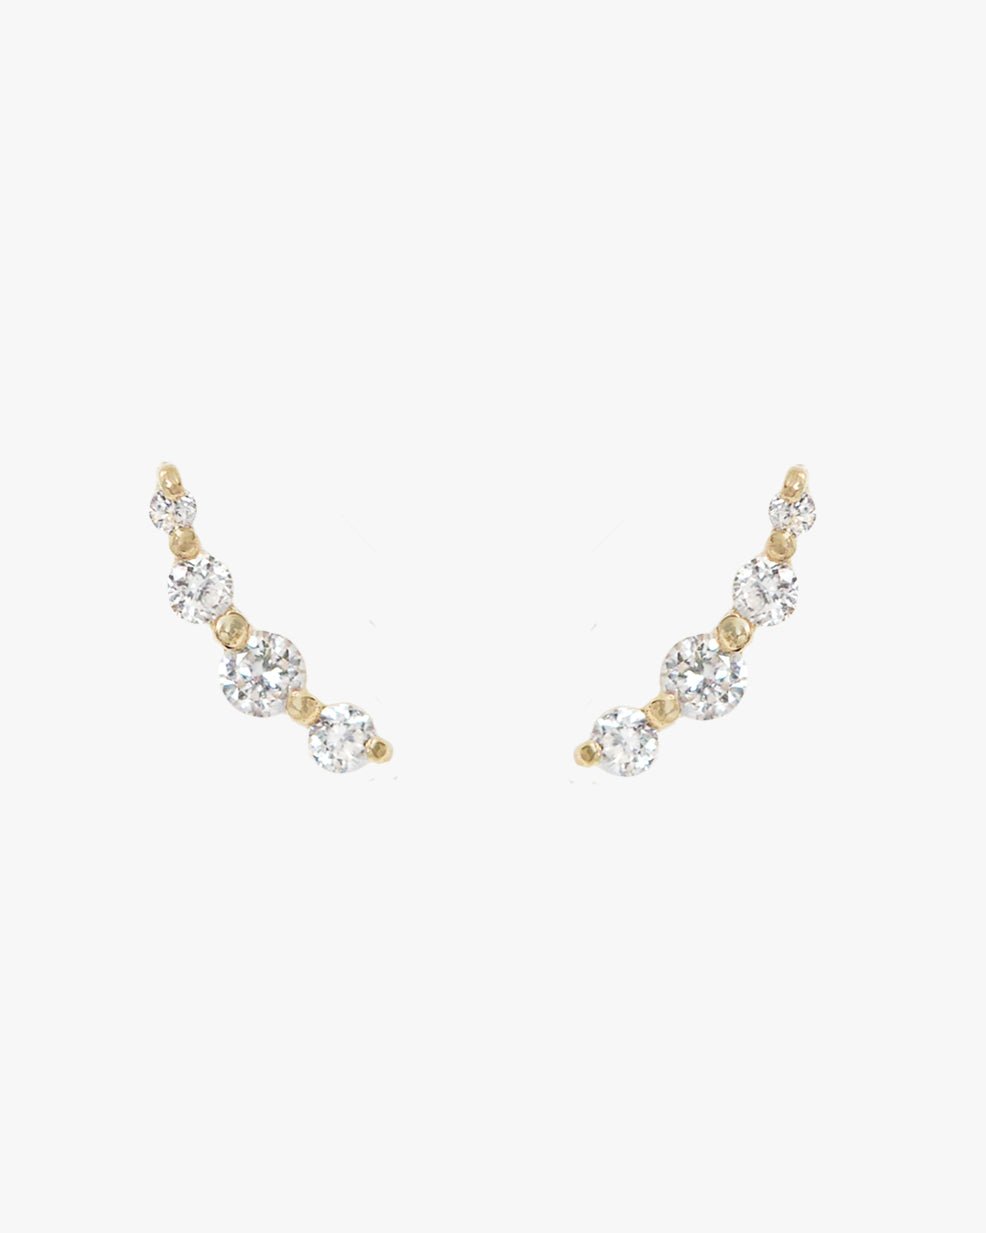 NEWPORT CURVED DIAMOND EARRINGS - Shop Cupcakes and Cashmere